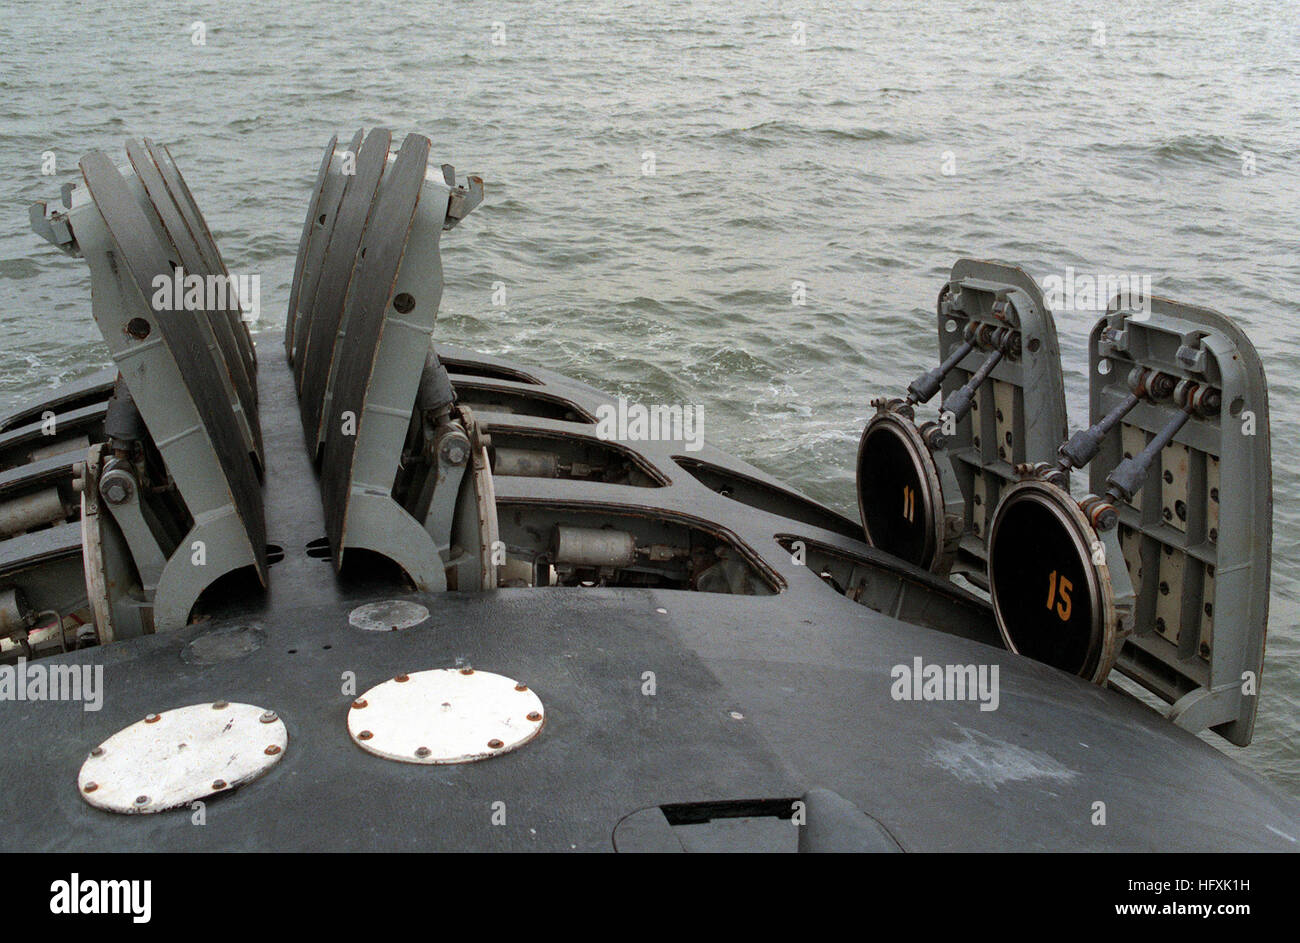 The hatches of the 12 vertical-launch Tomahawk missile tubes stand open on the bow of the nuclear-powered attack submarine USS OKLAHOMA CITY (SSN-723). VLS on board Oklahoma City (SSN-723) Stock Photo